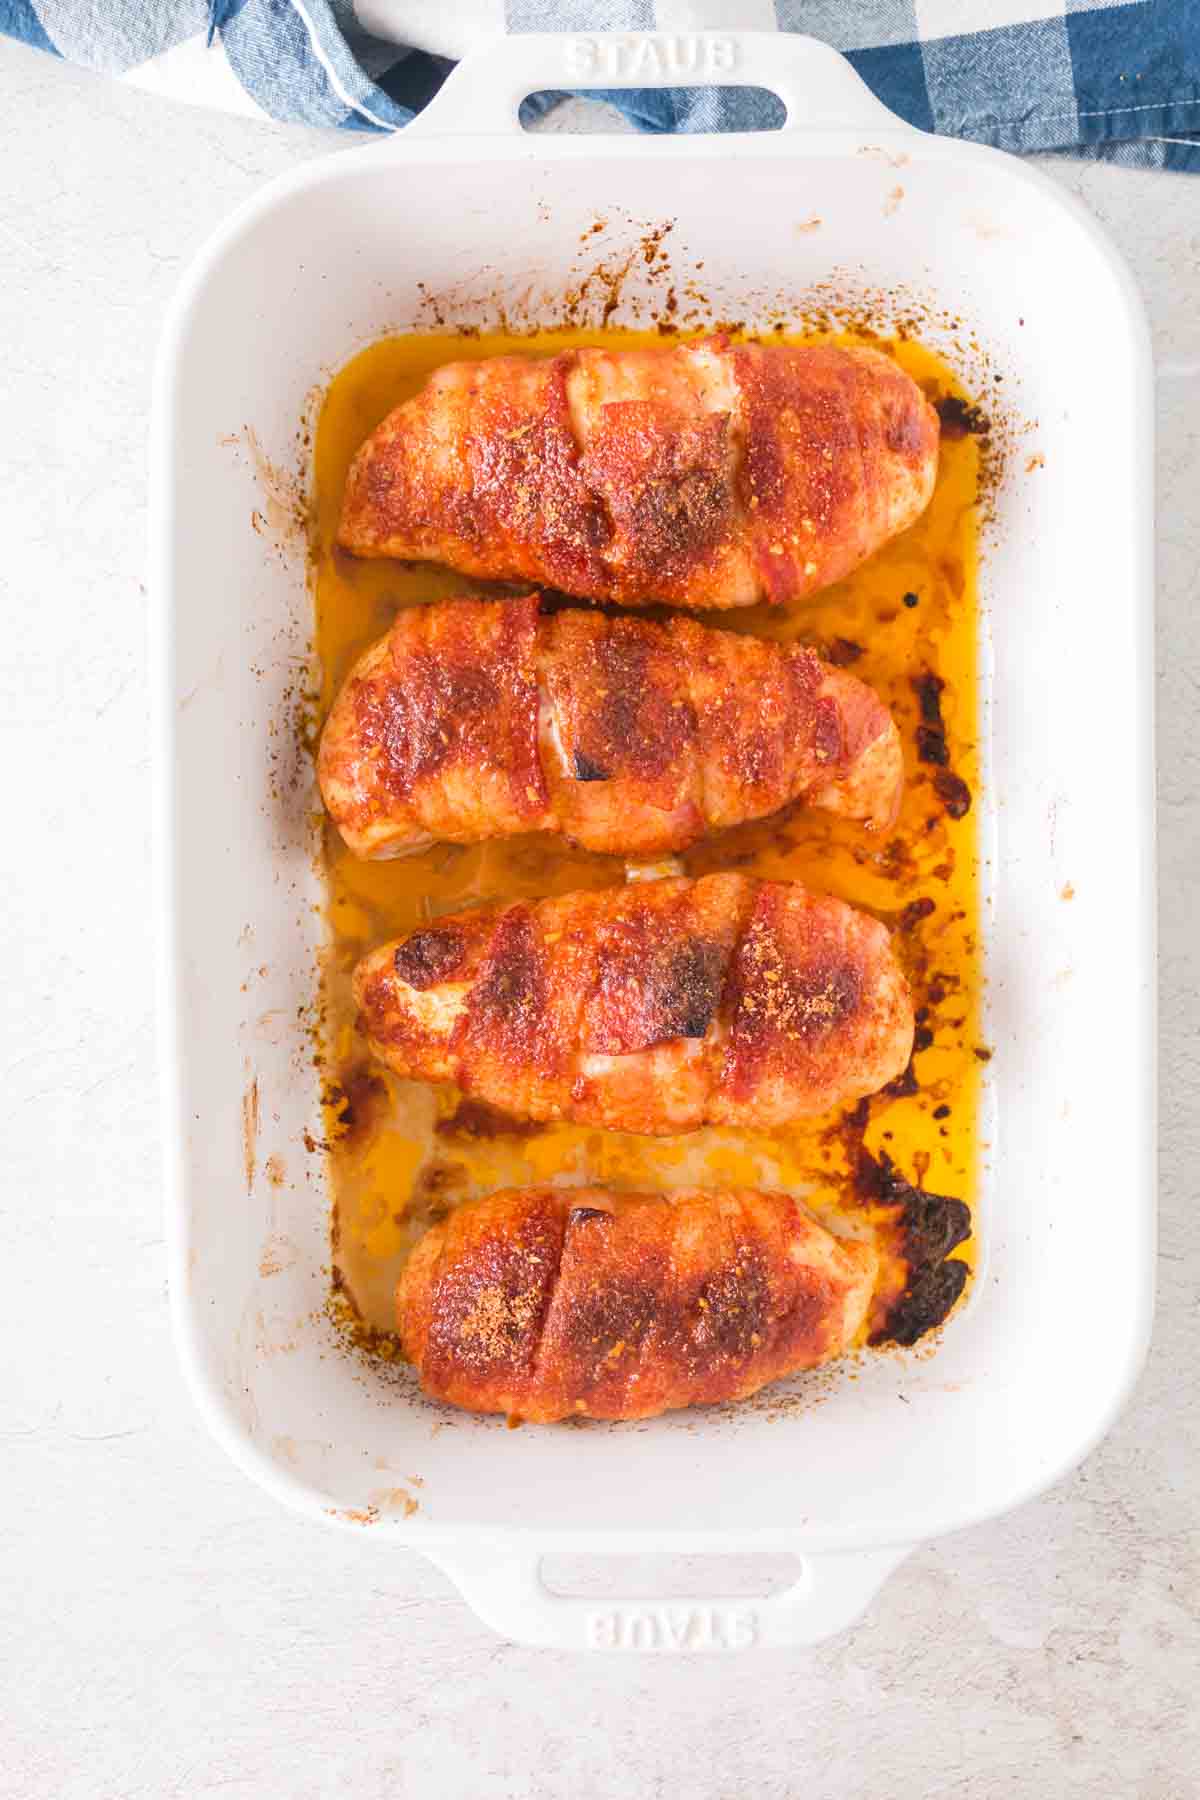 Bacon wrapped chicken in a baking dish.